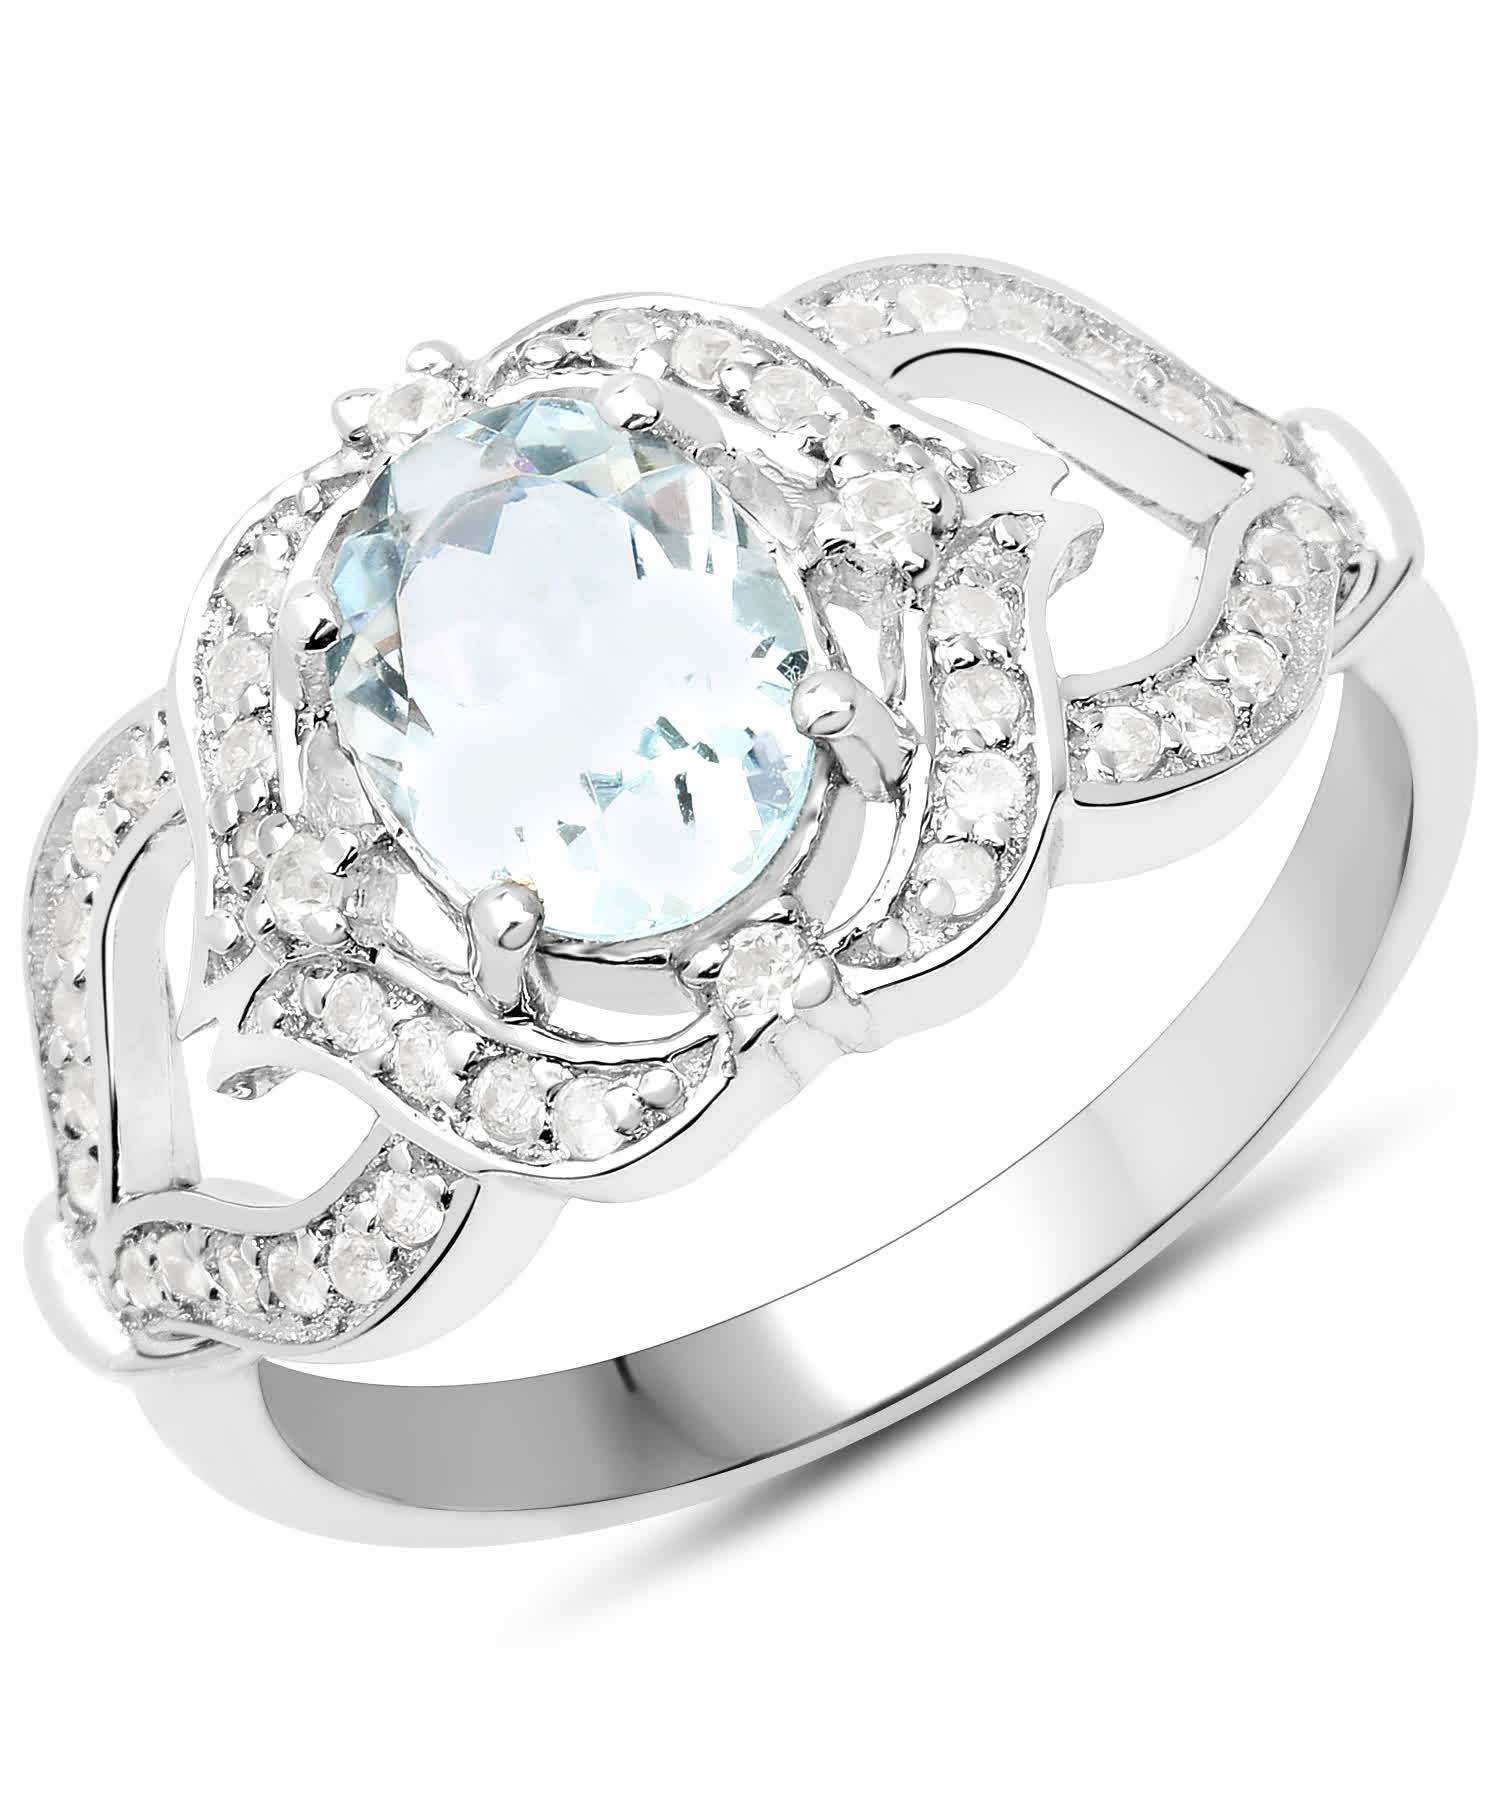 1.37ctw Natural Icy Sky Blue Aquamarine and Zircon Rhodium Plated 925 Sterling Silver Right Hand Ring View 1